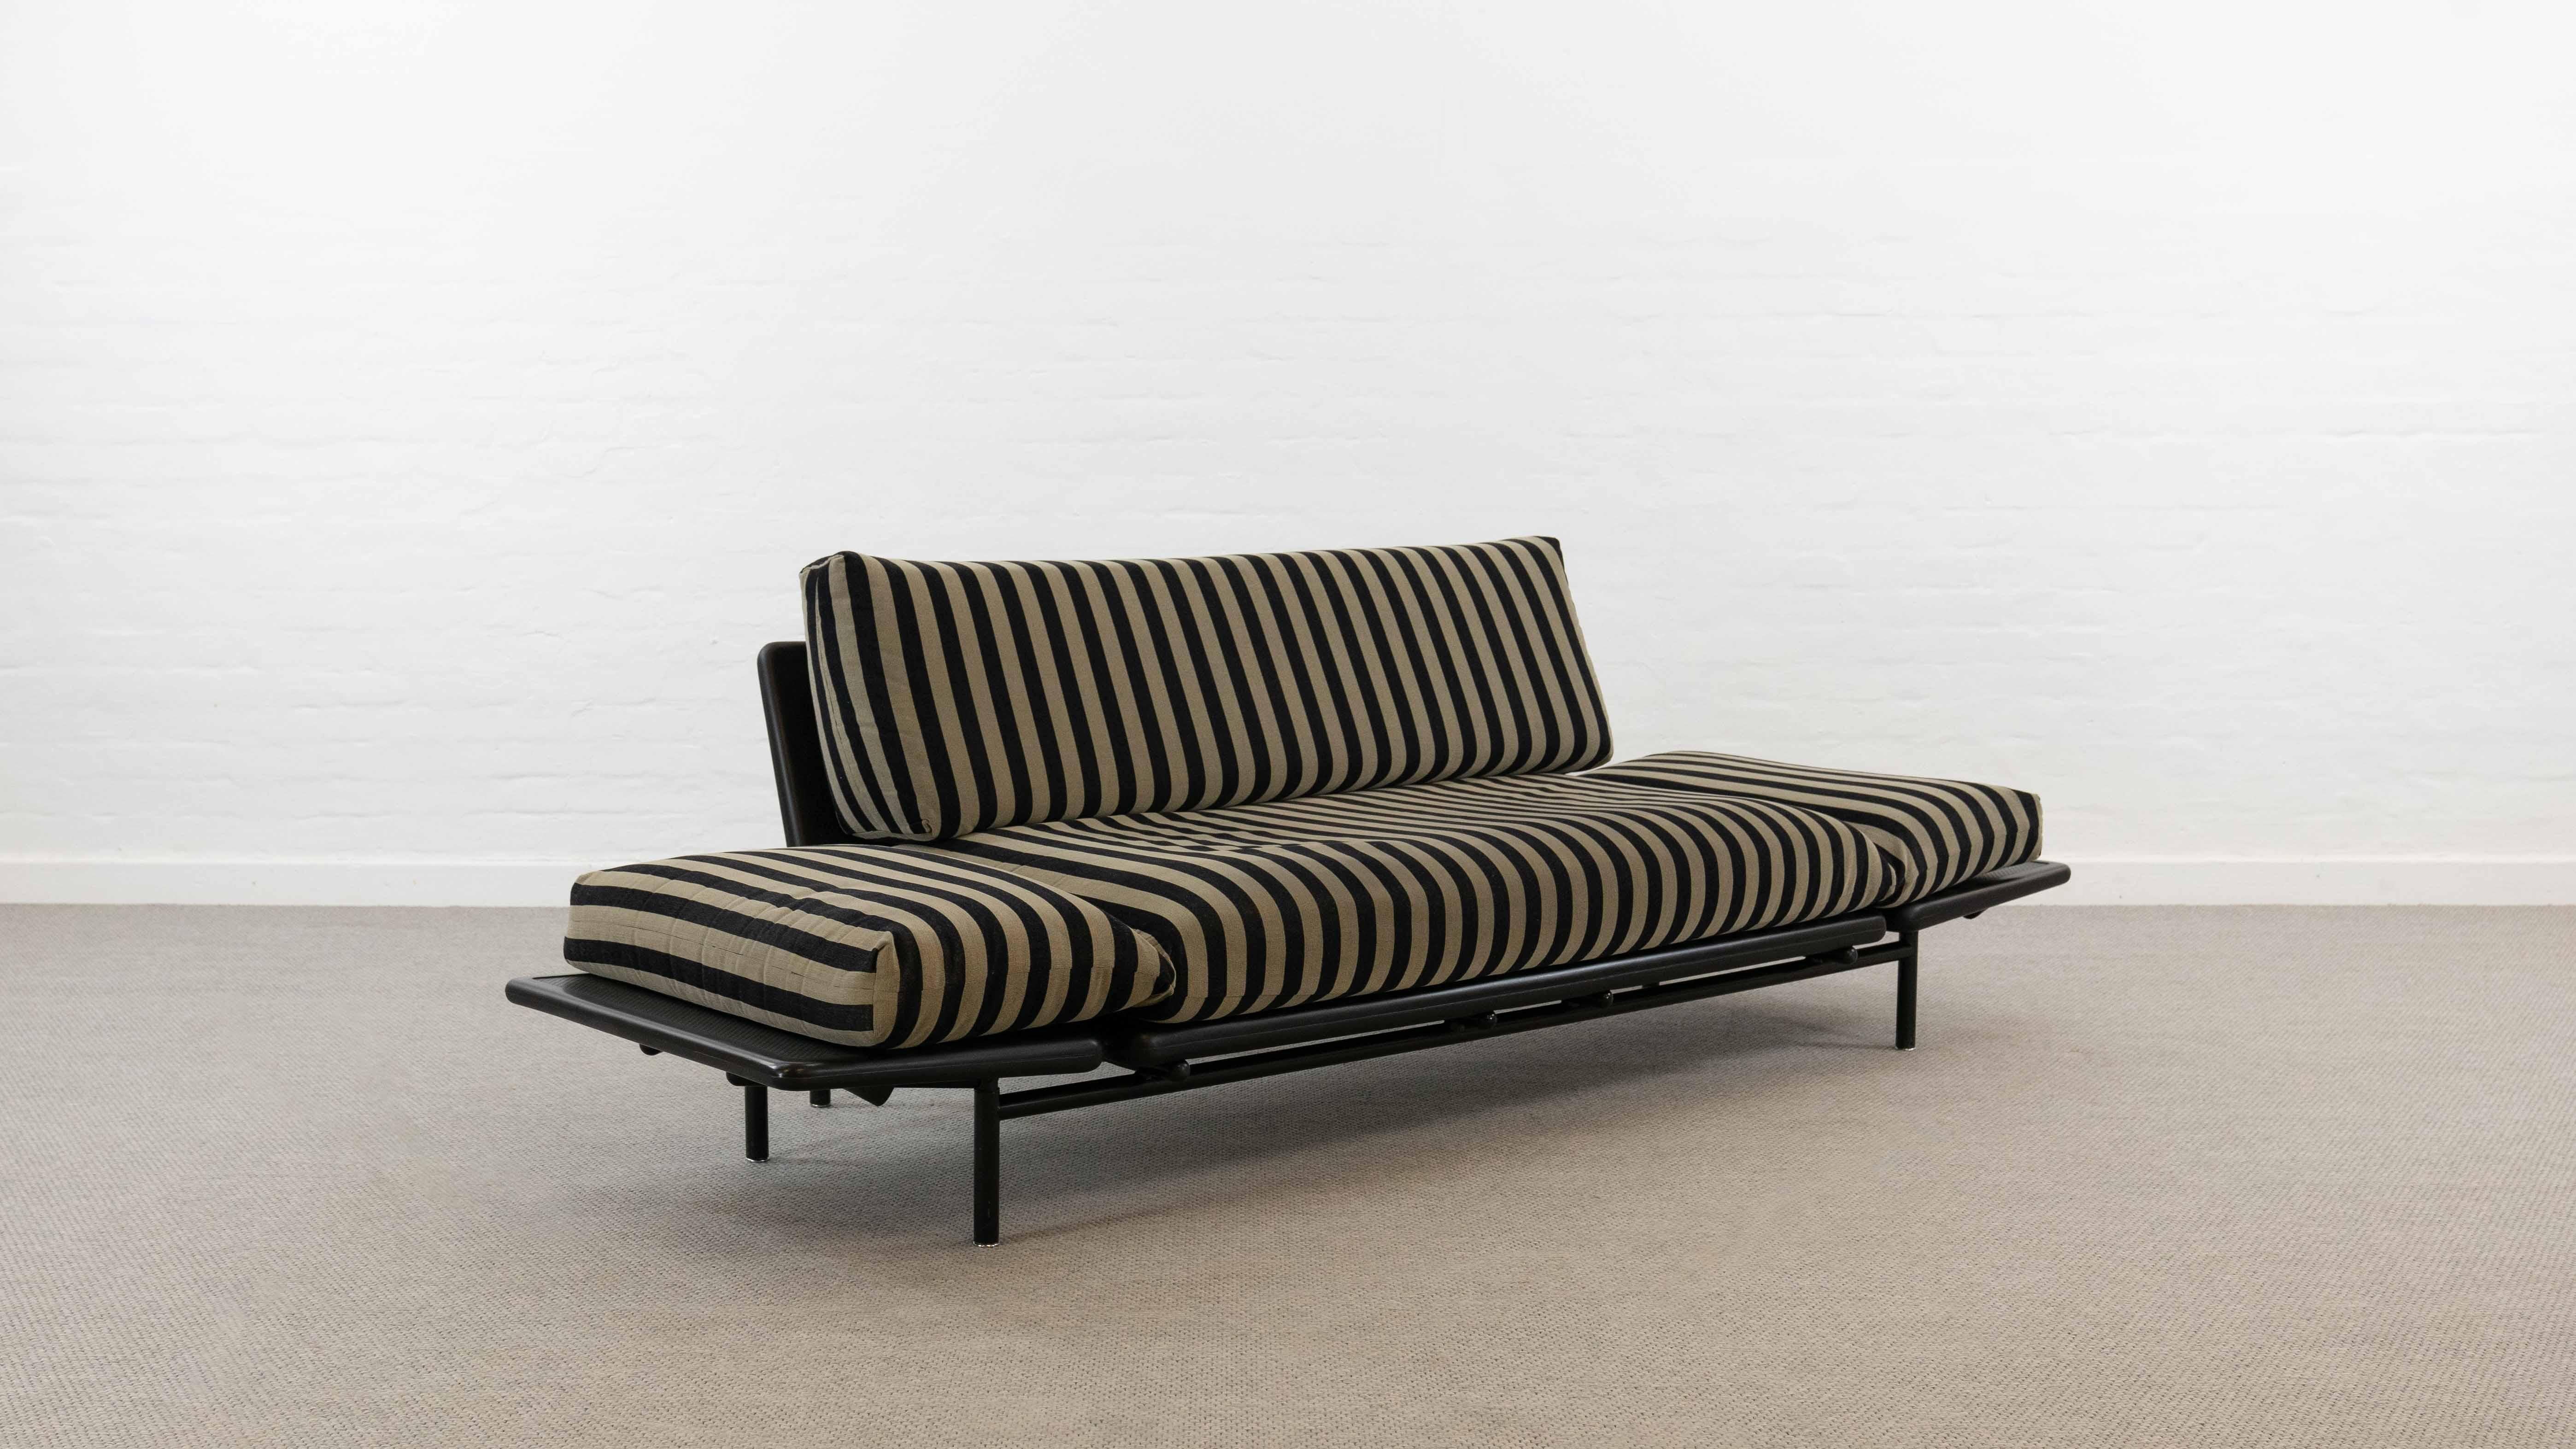 Late 20th Century RATAPLAN SOFA - DAYBED BY ROBERTO TAPINASSI FOR DEMA, ITALY 80s